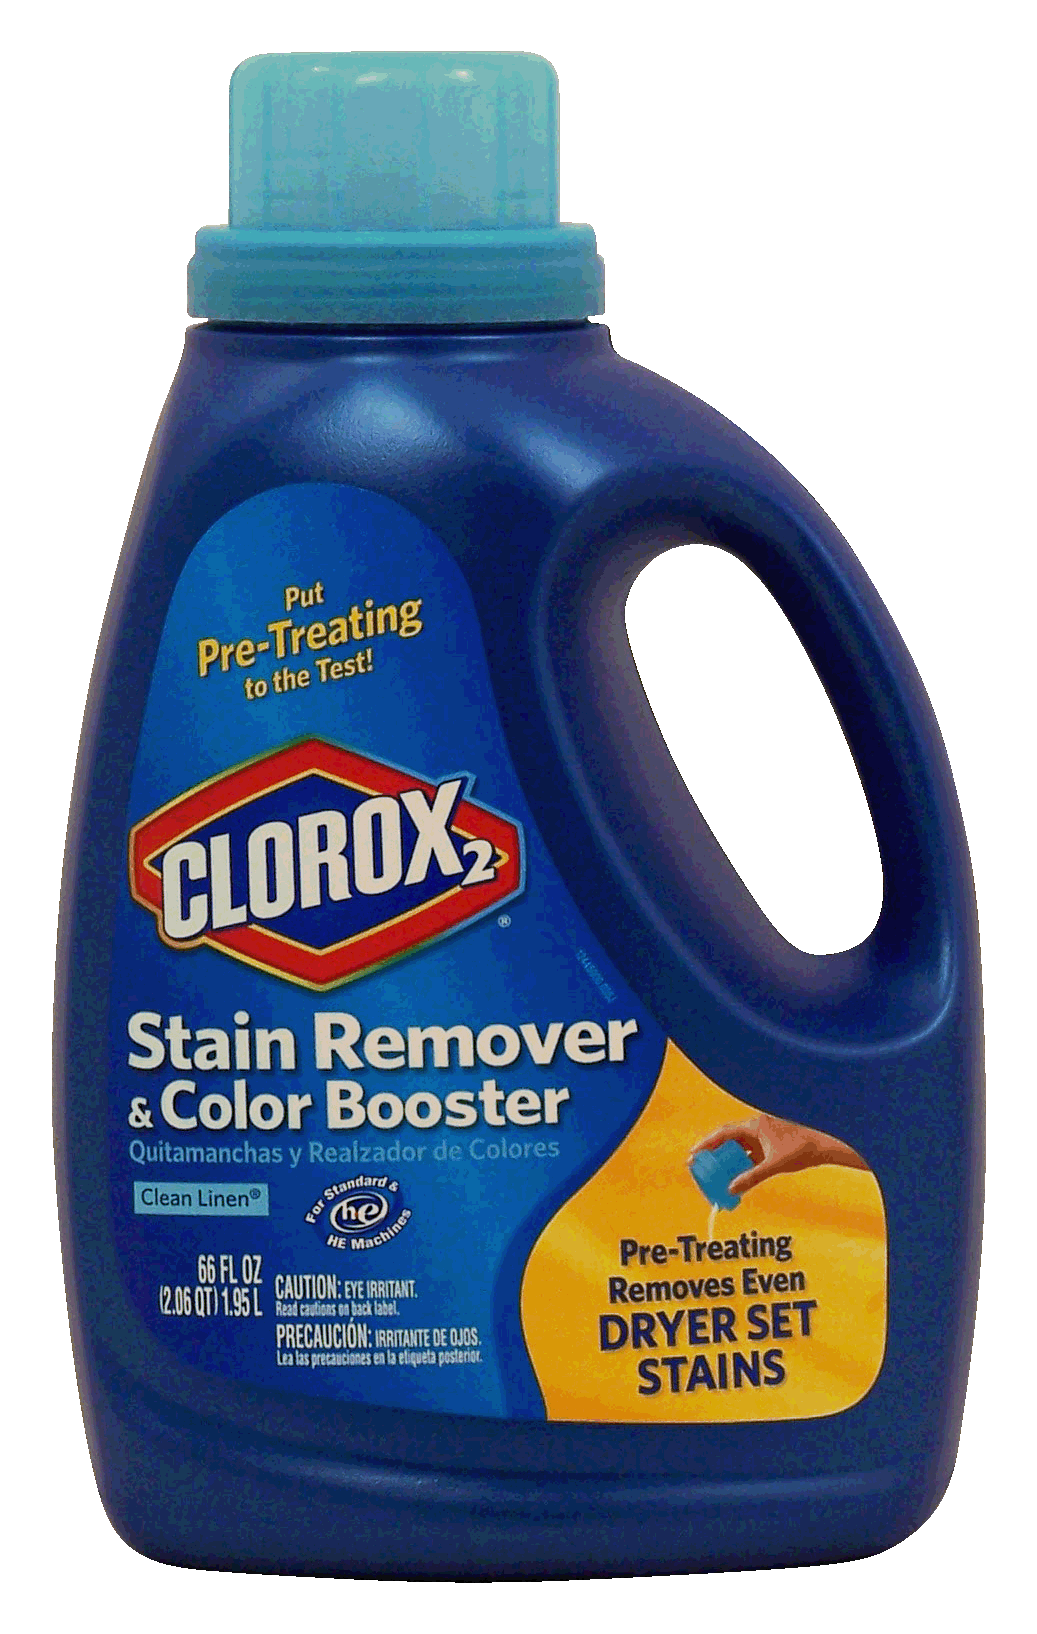 Clorox 2  stain remover & color booster, clean linen scent Full-Size Picture